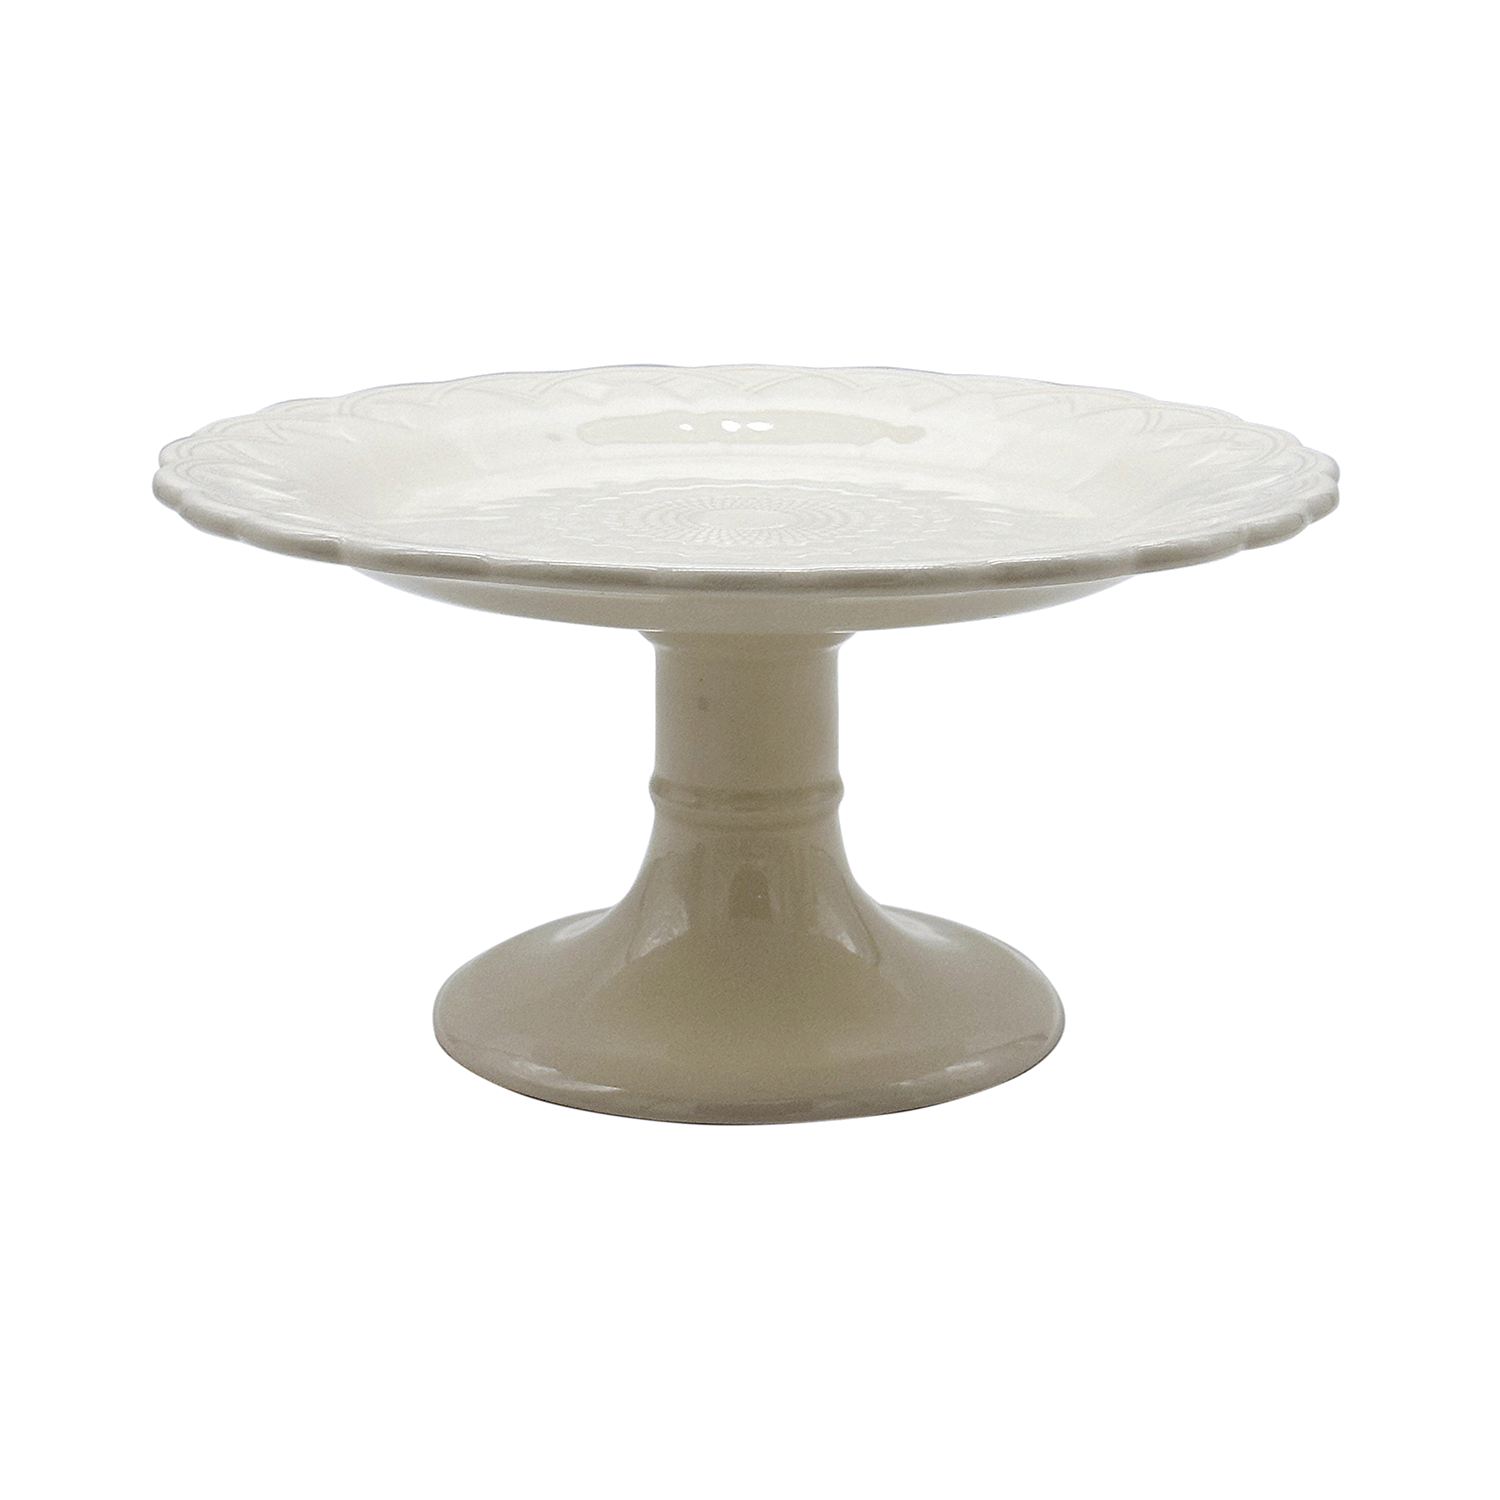 Tall Cream Dolce Cake Stand